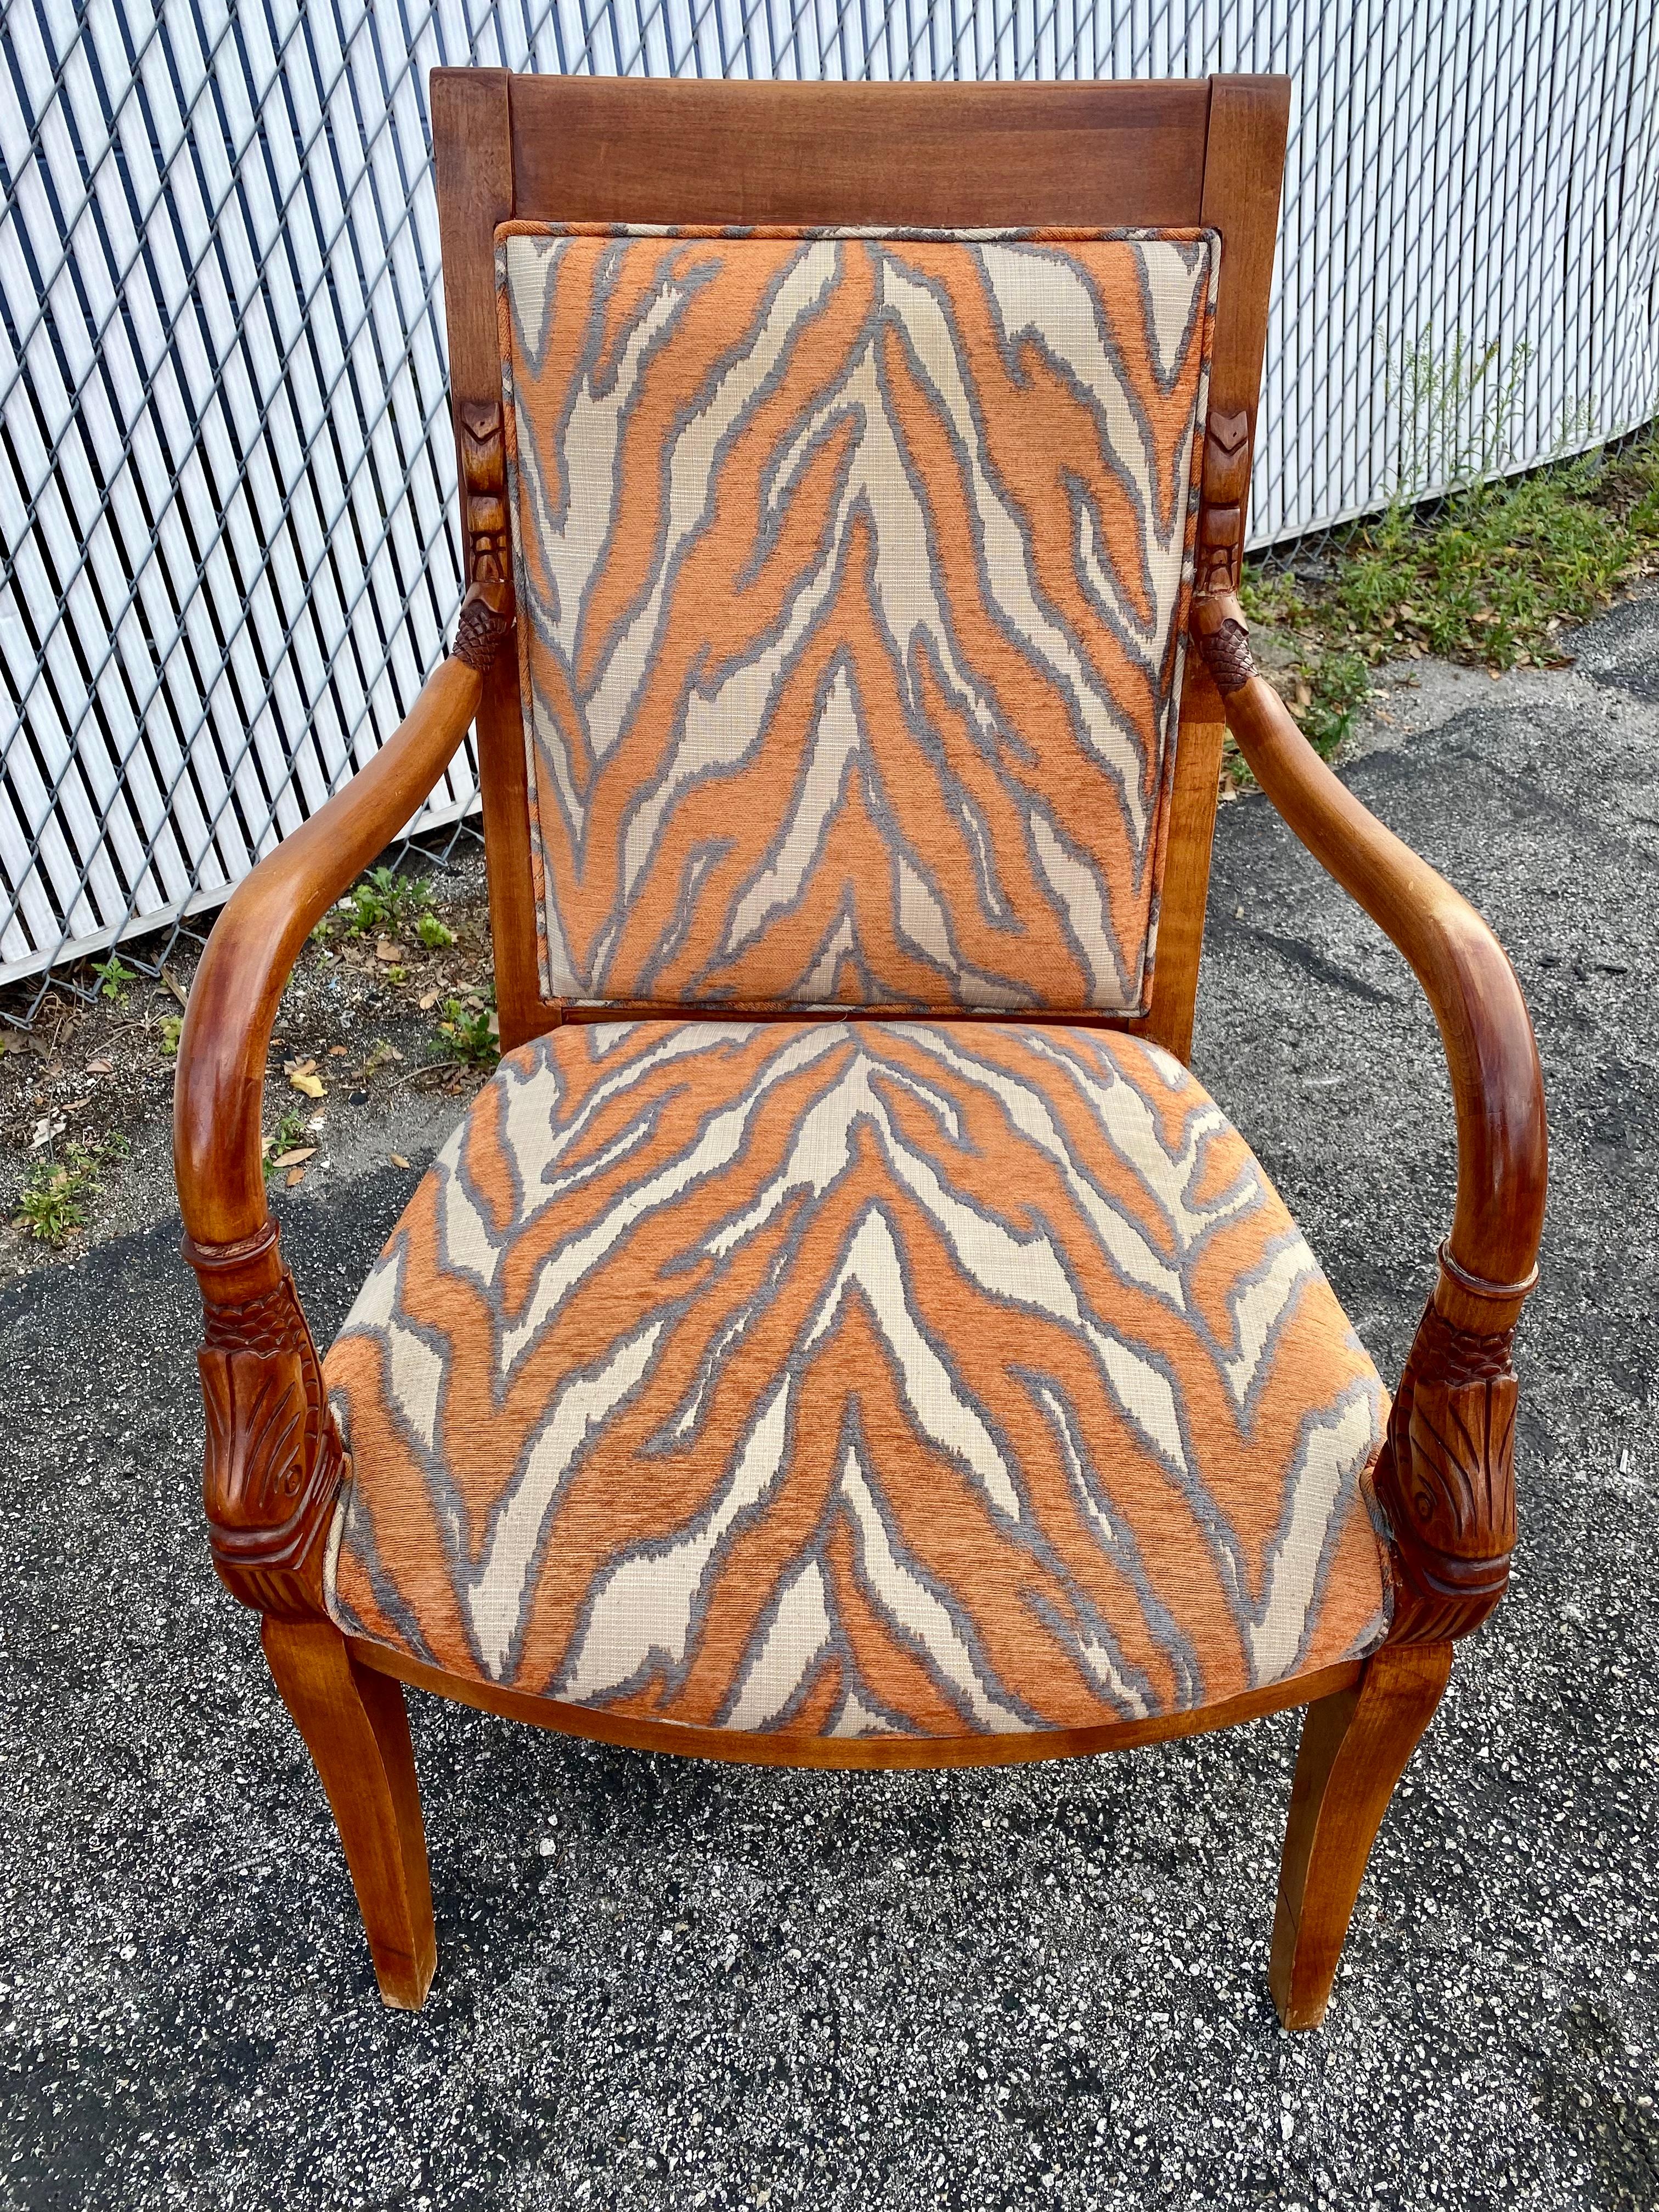 1970s Carved Wood Gold Fish Zebra Bentwood Chairs and Ottoman, Set of 3 For Sale 4